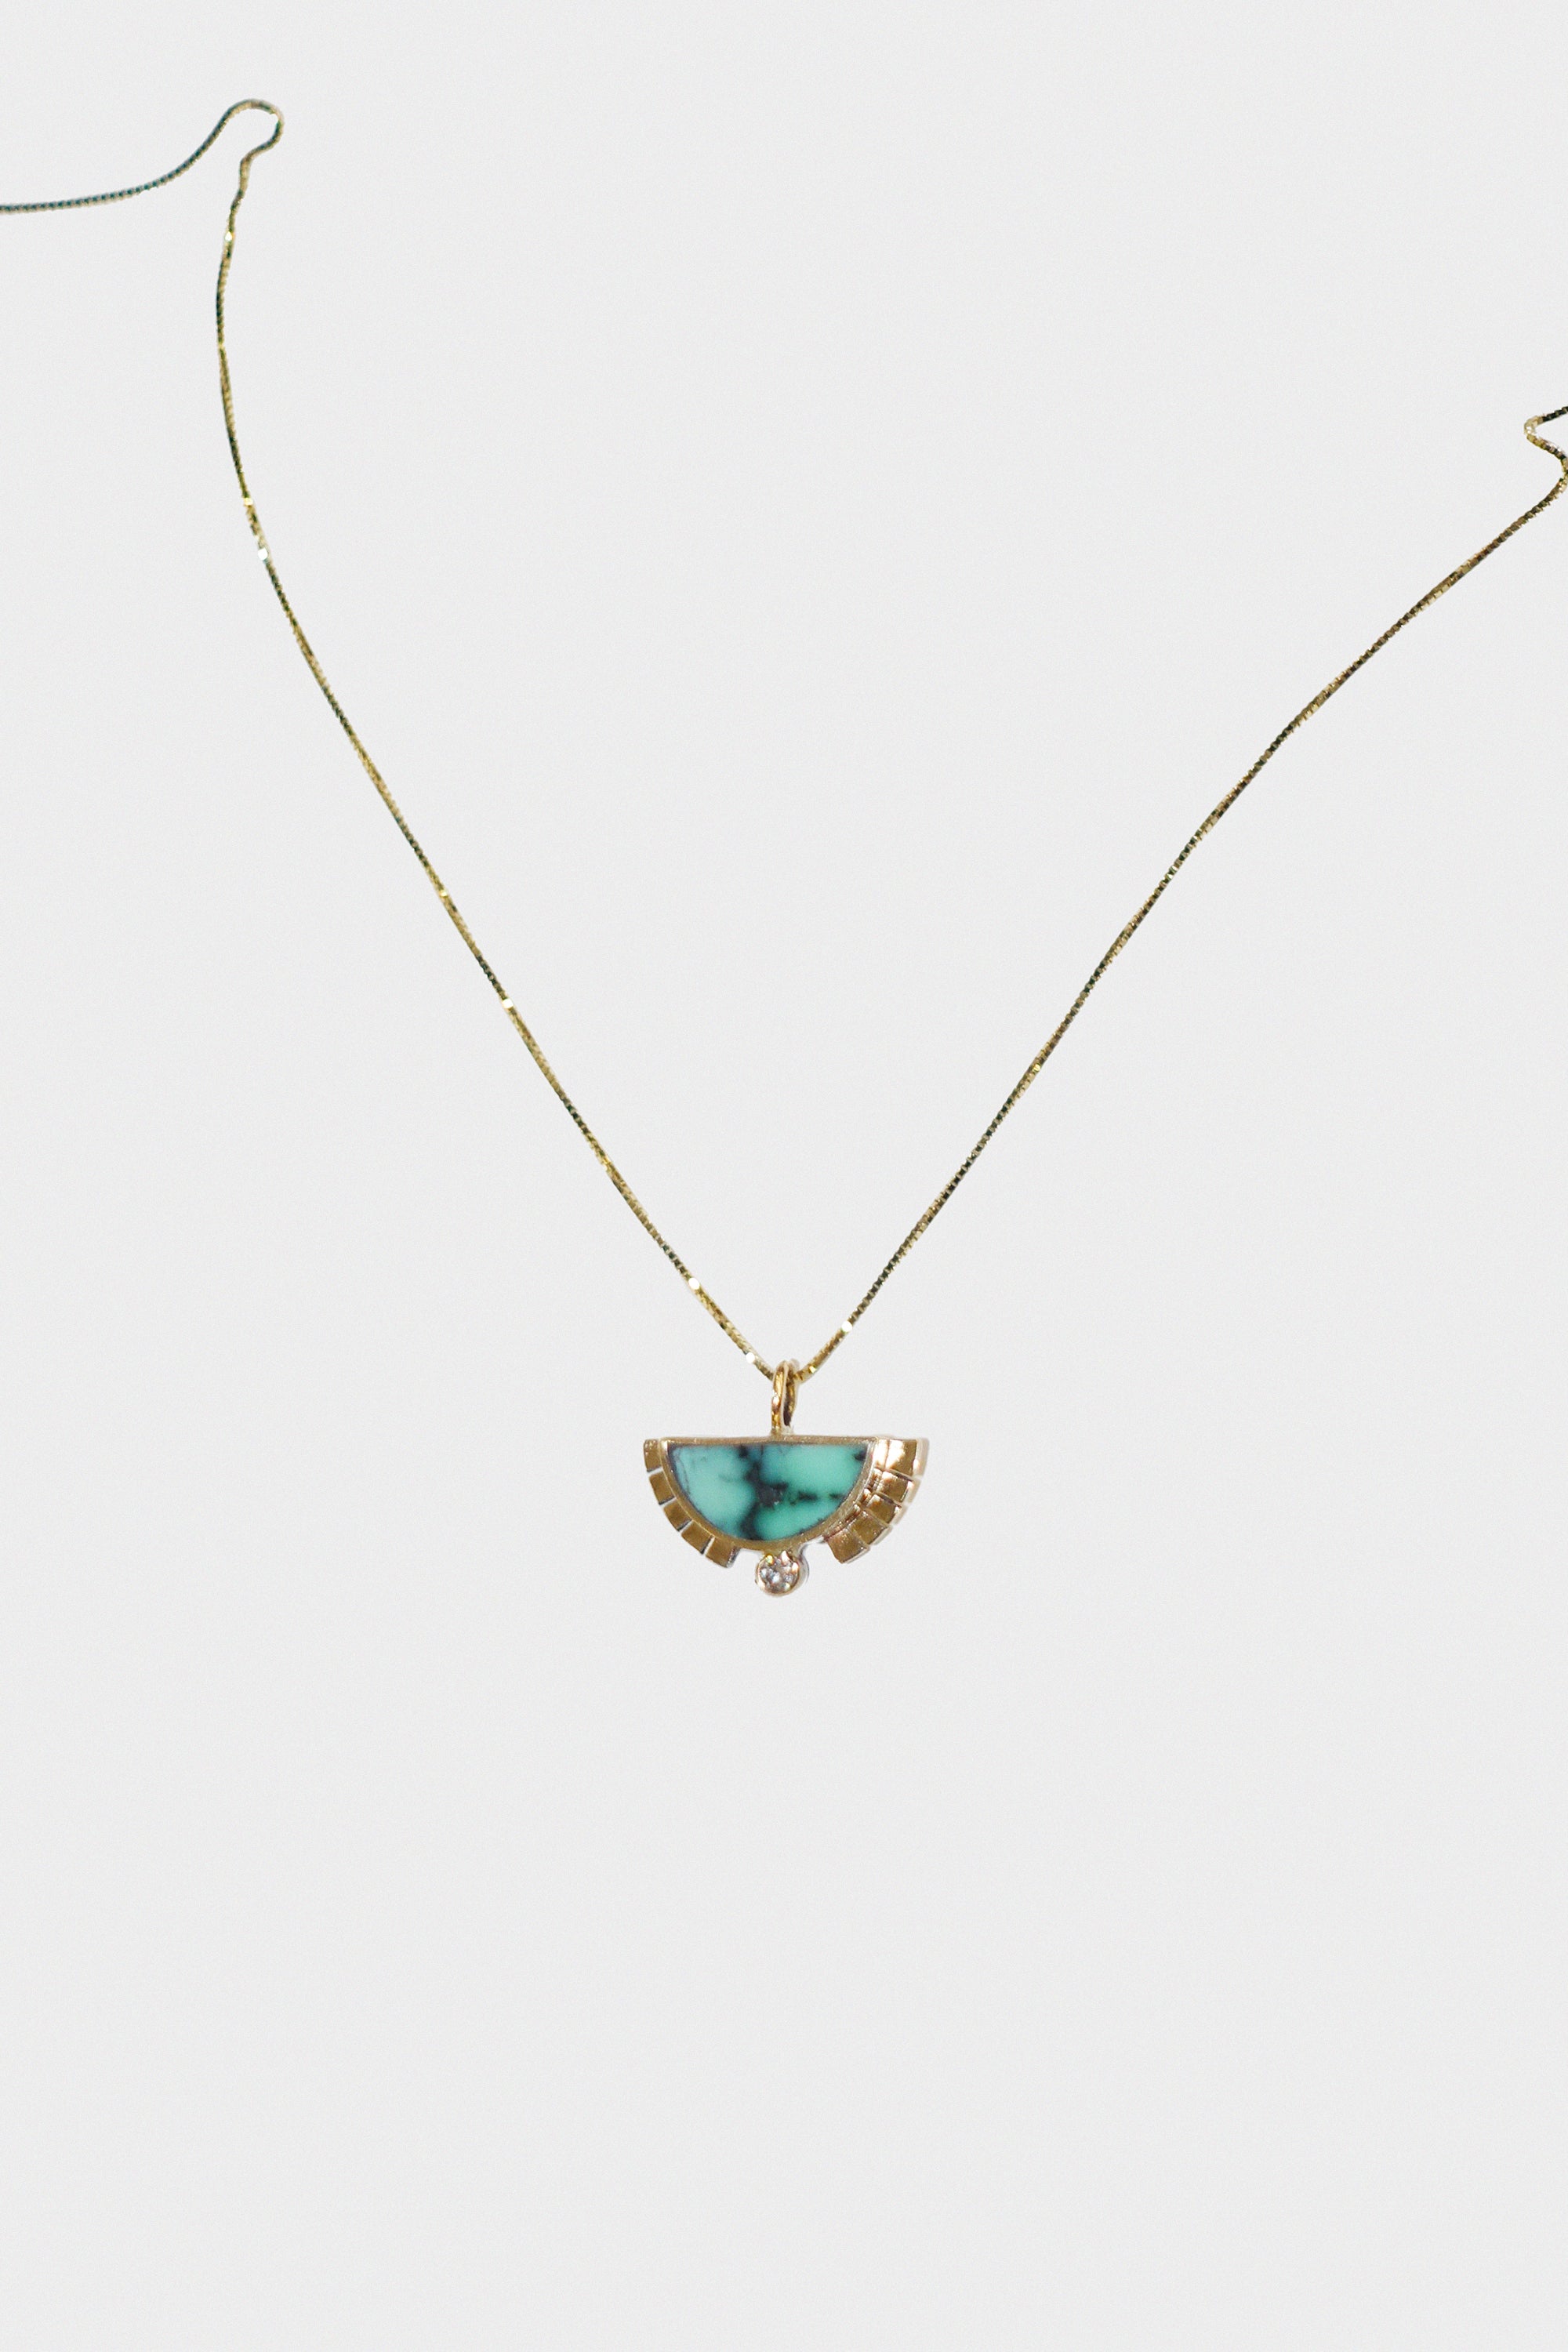 Rising Sol Necklace in 14k Yellow Gold & Angel Wing Variscite